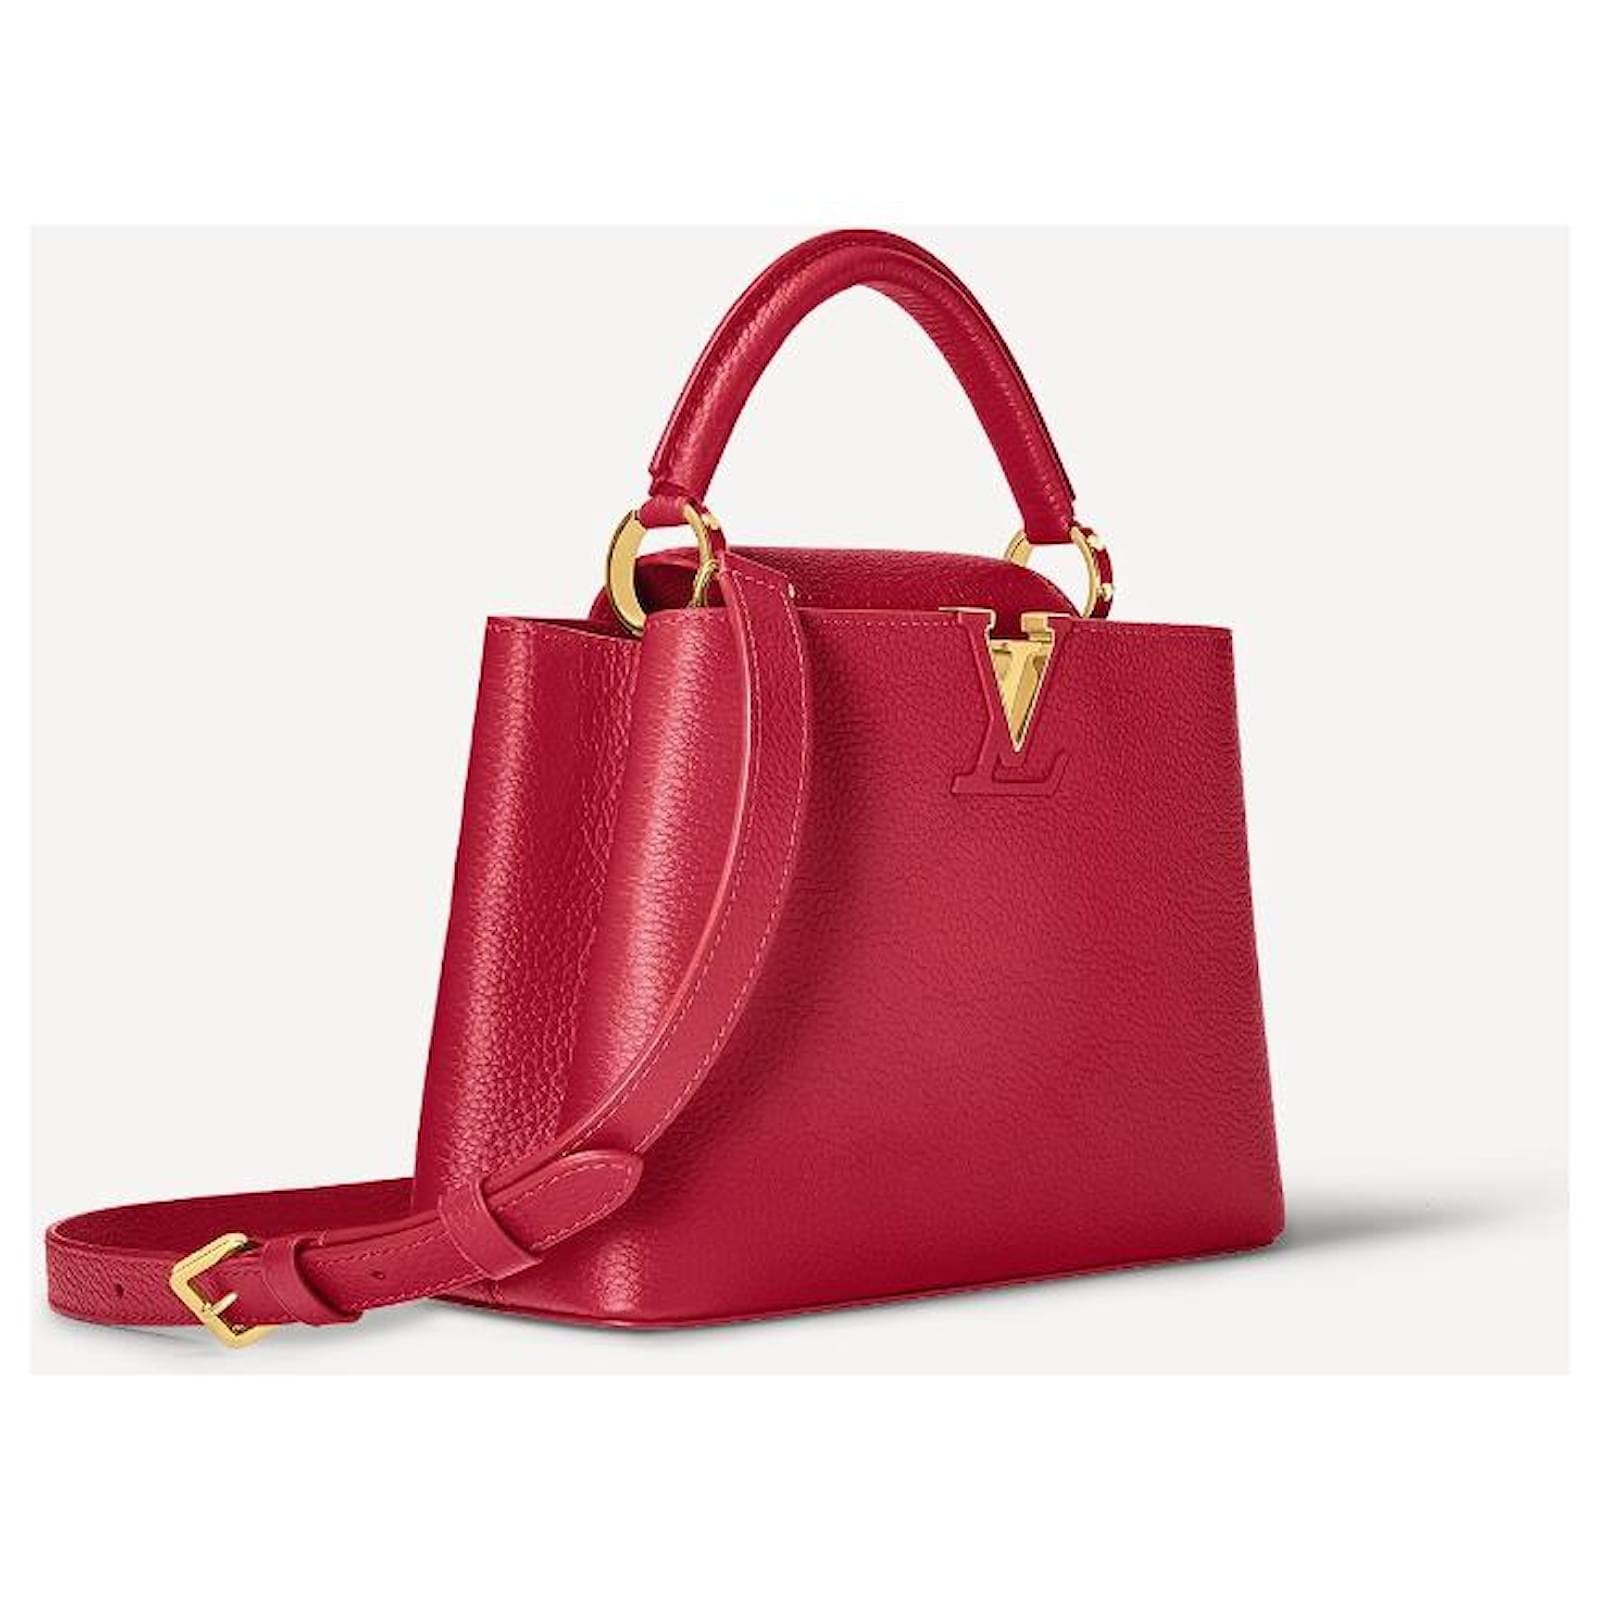 Capucines Mini Limited Edition bag in red leather